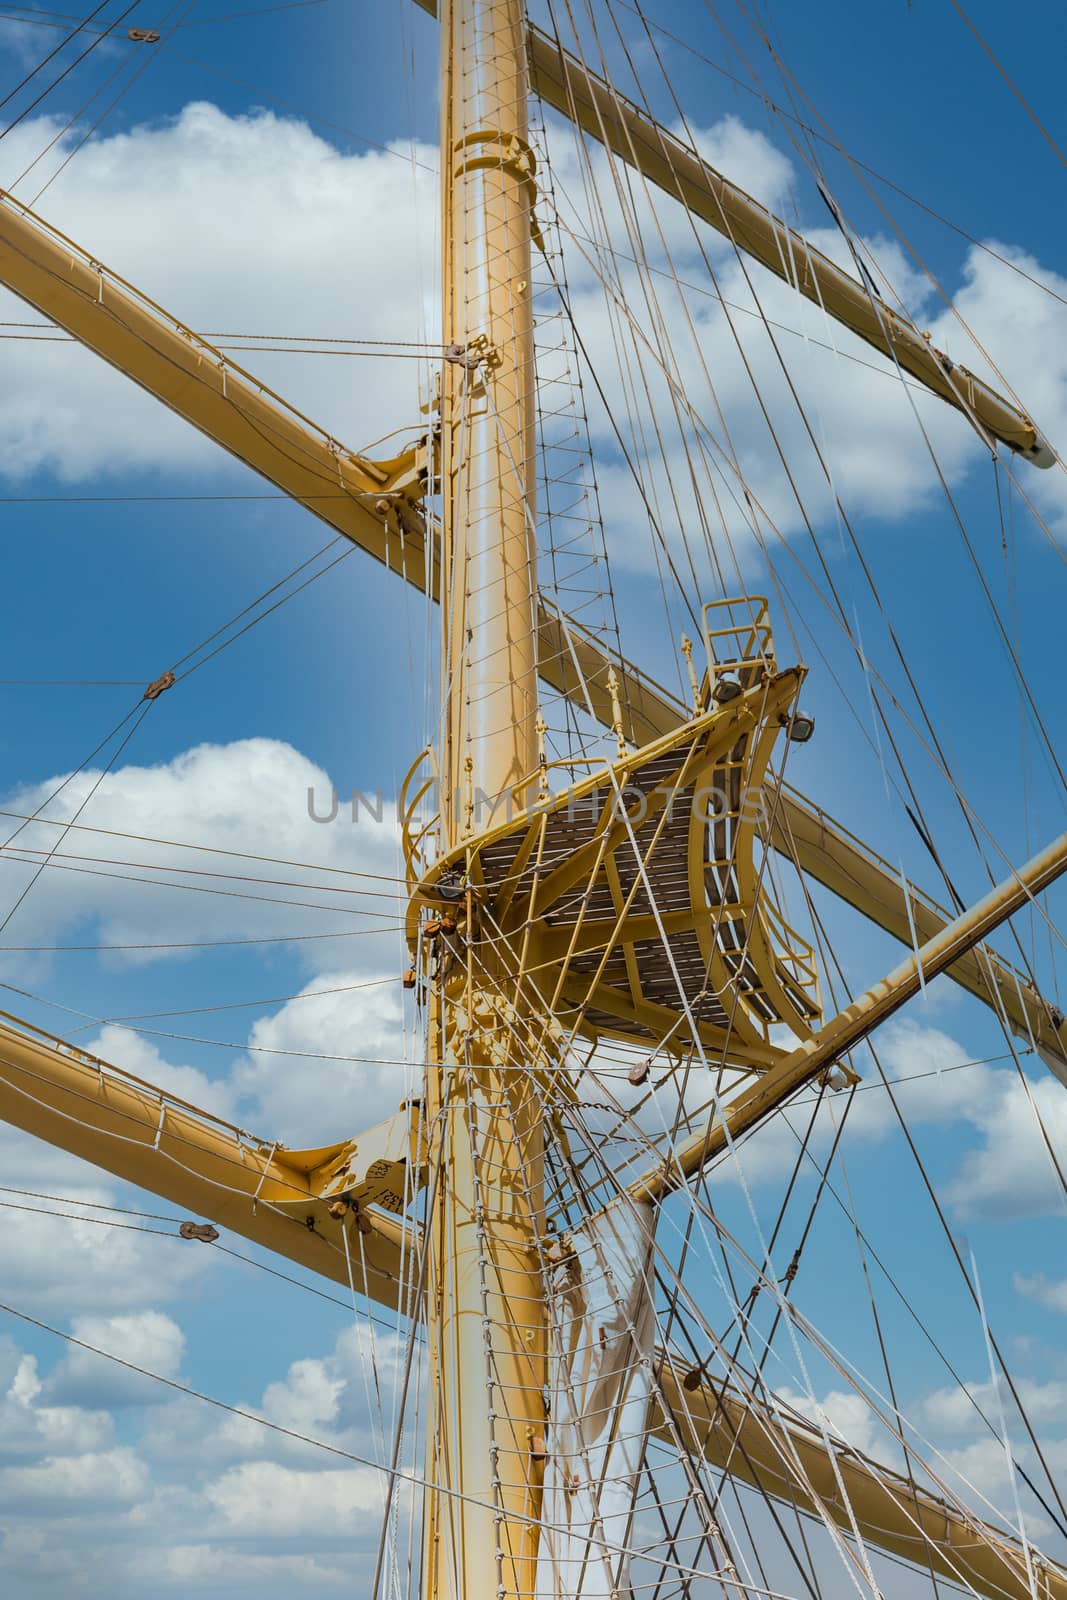 Crows Nest on Clipper Ship Mast by dbvirago